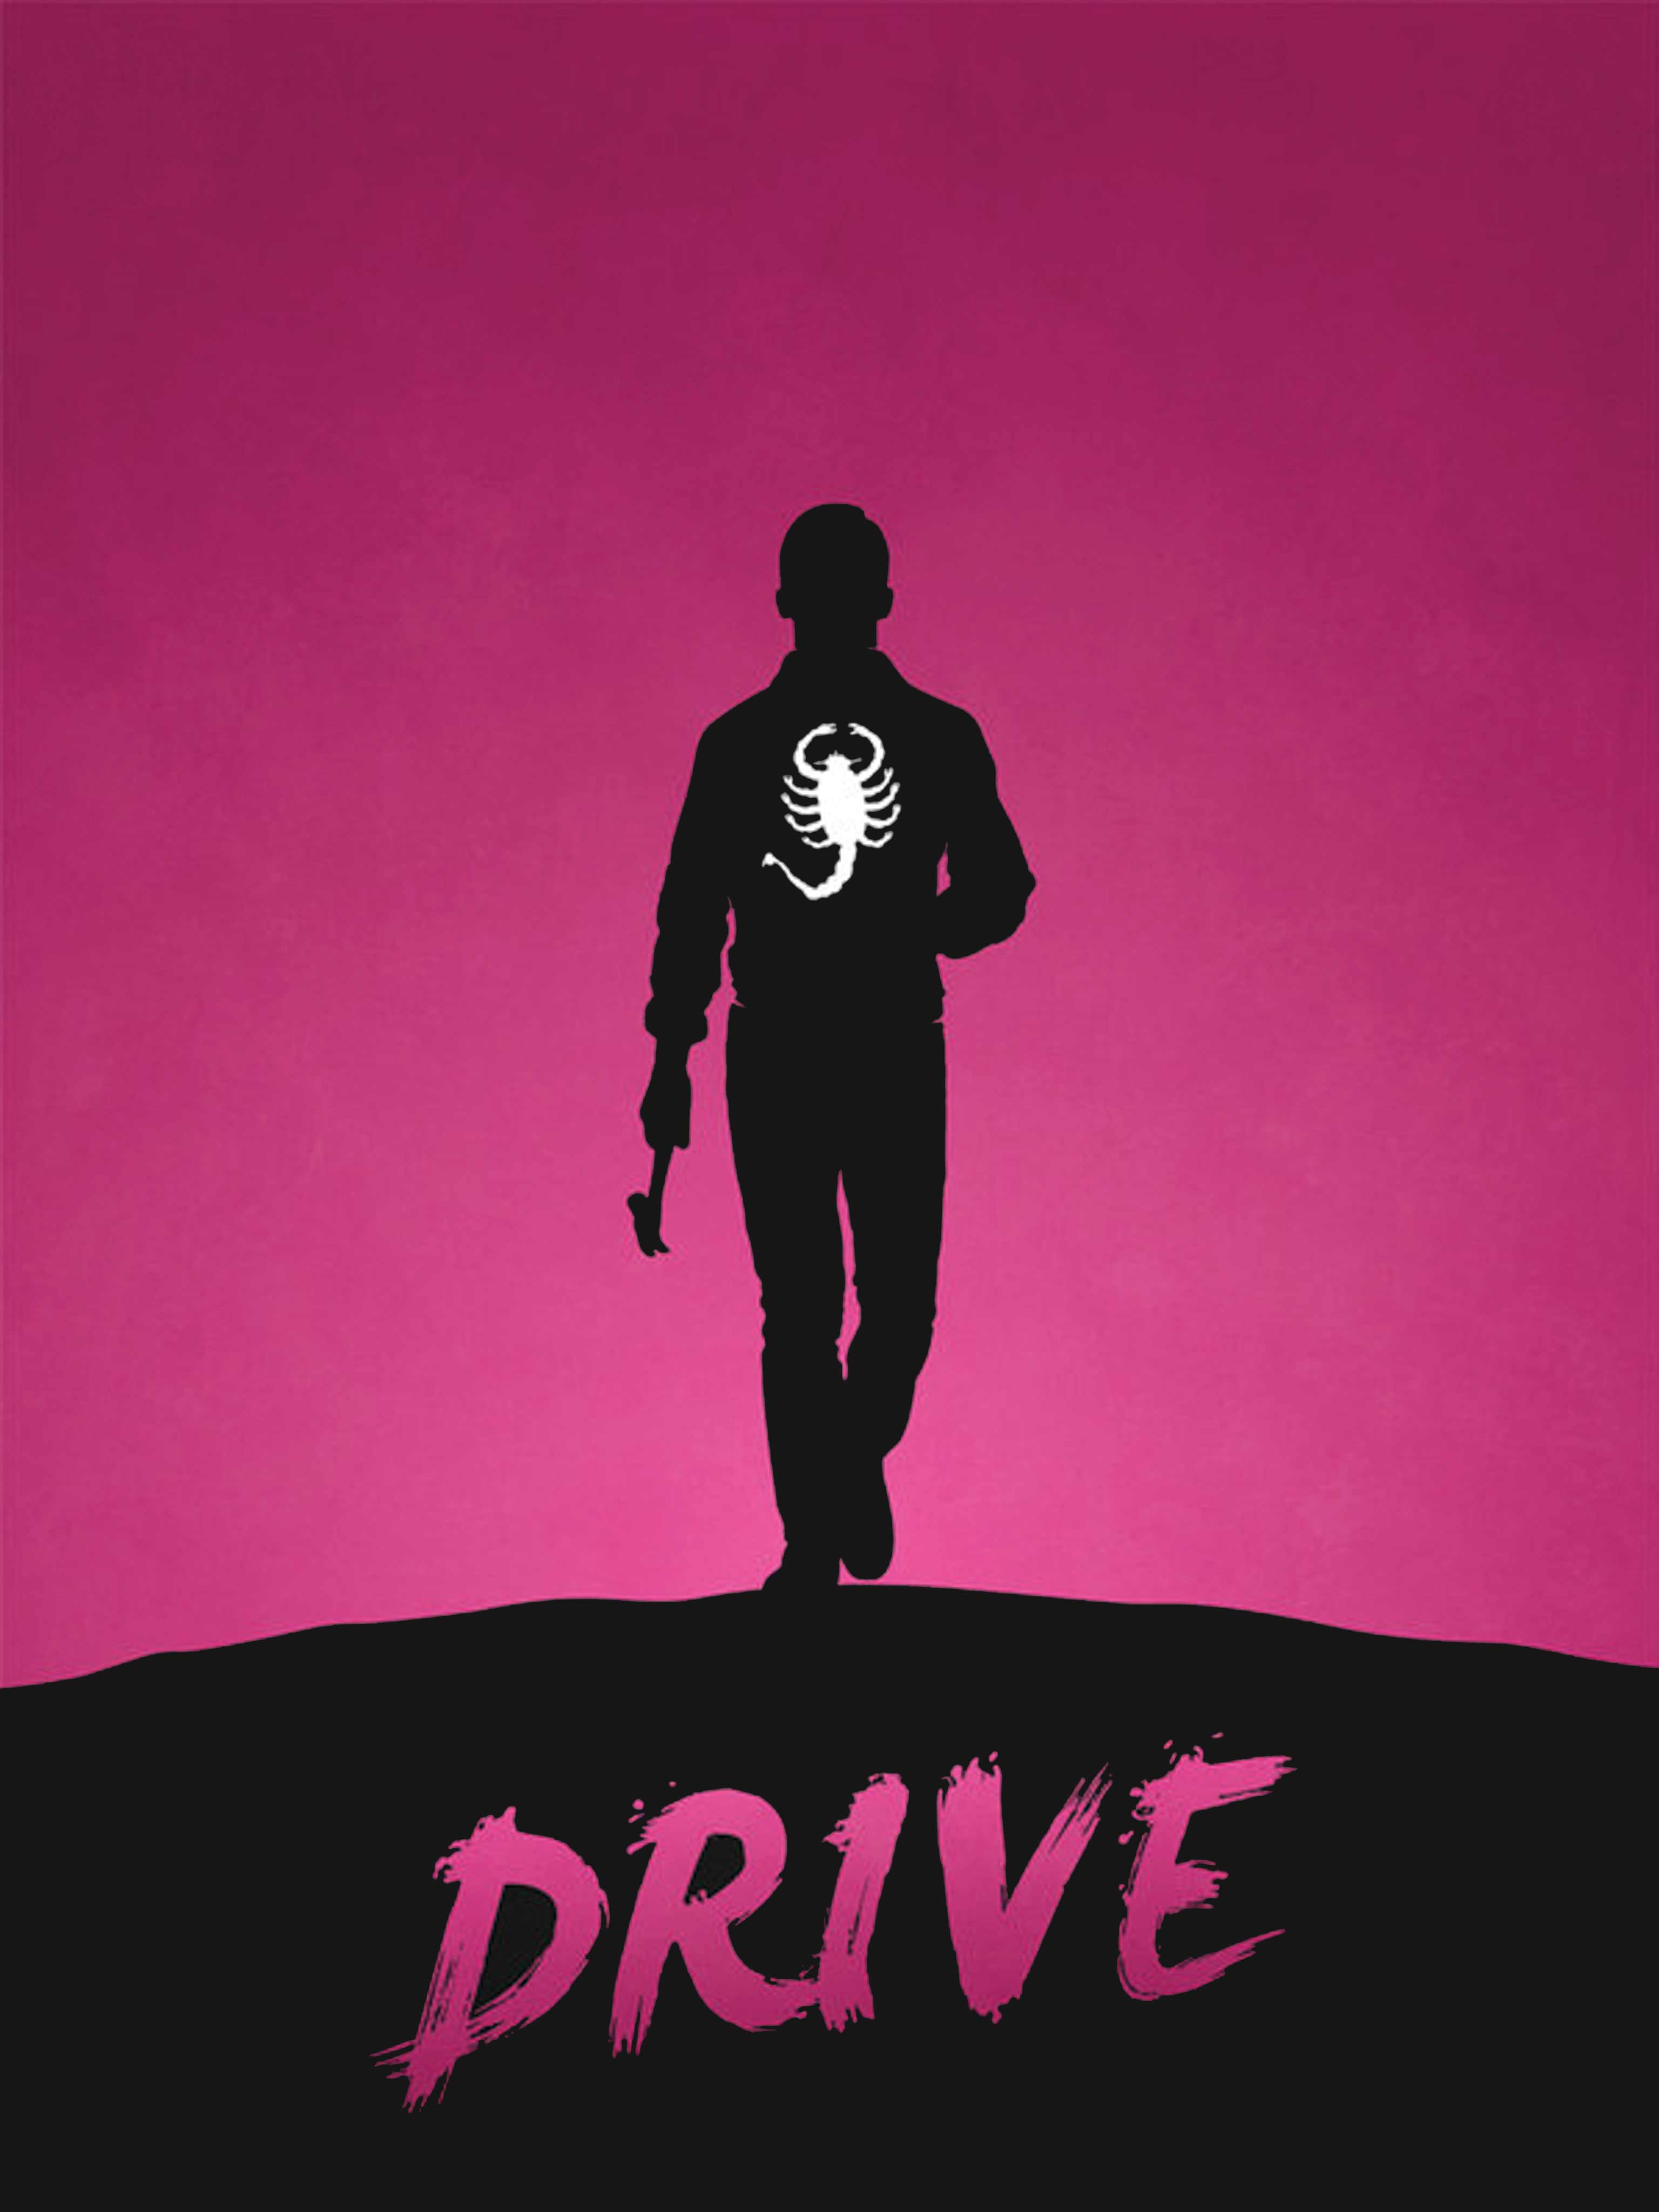 Drive by Wallpaper. Solid State Drive Wallpaper, Sunset Overdrive Wallpaper and Onedrive Wallpaper